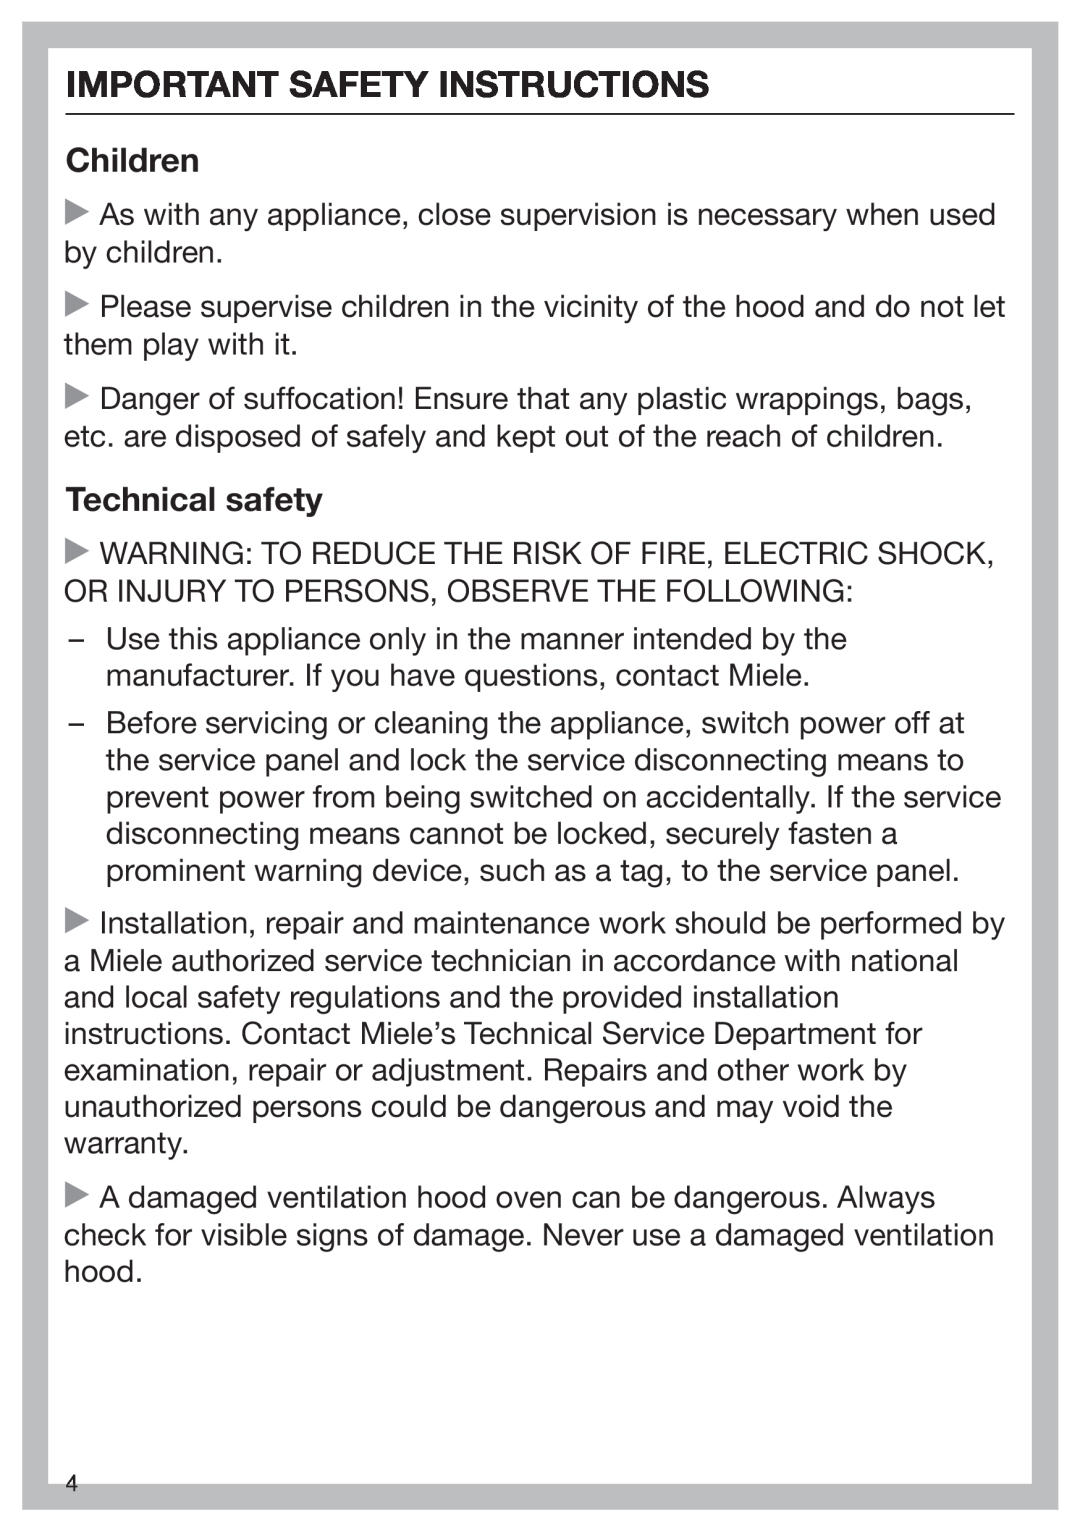 Miele 09 968 240 installation instructions Children, Technical safety, Important Safety Instructions 